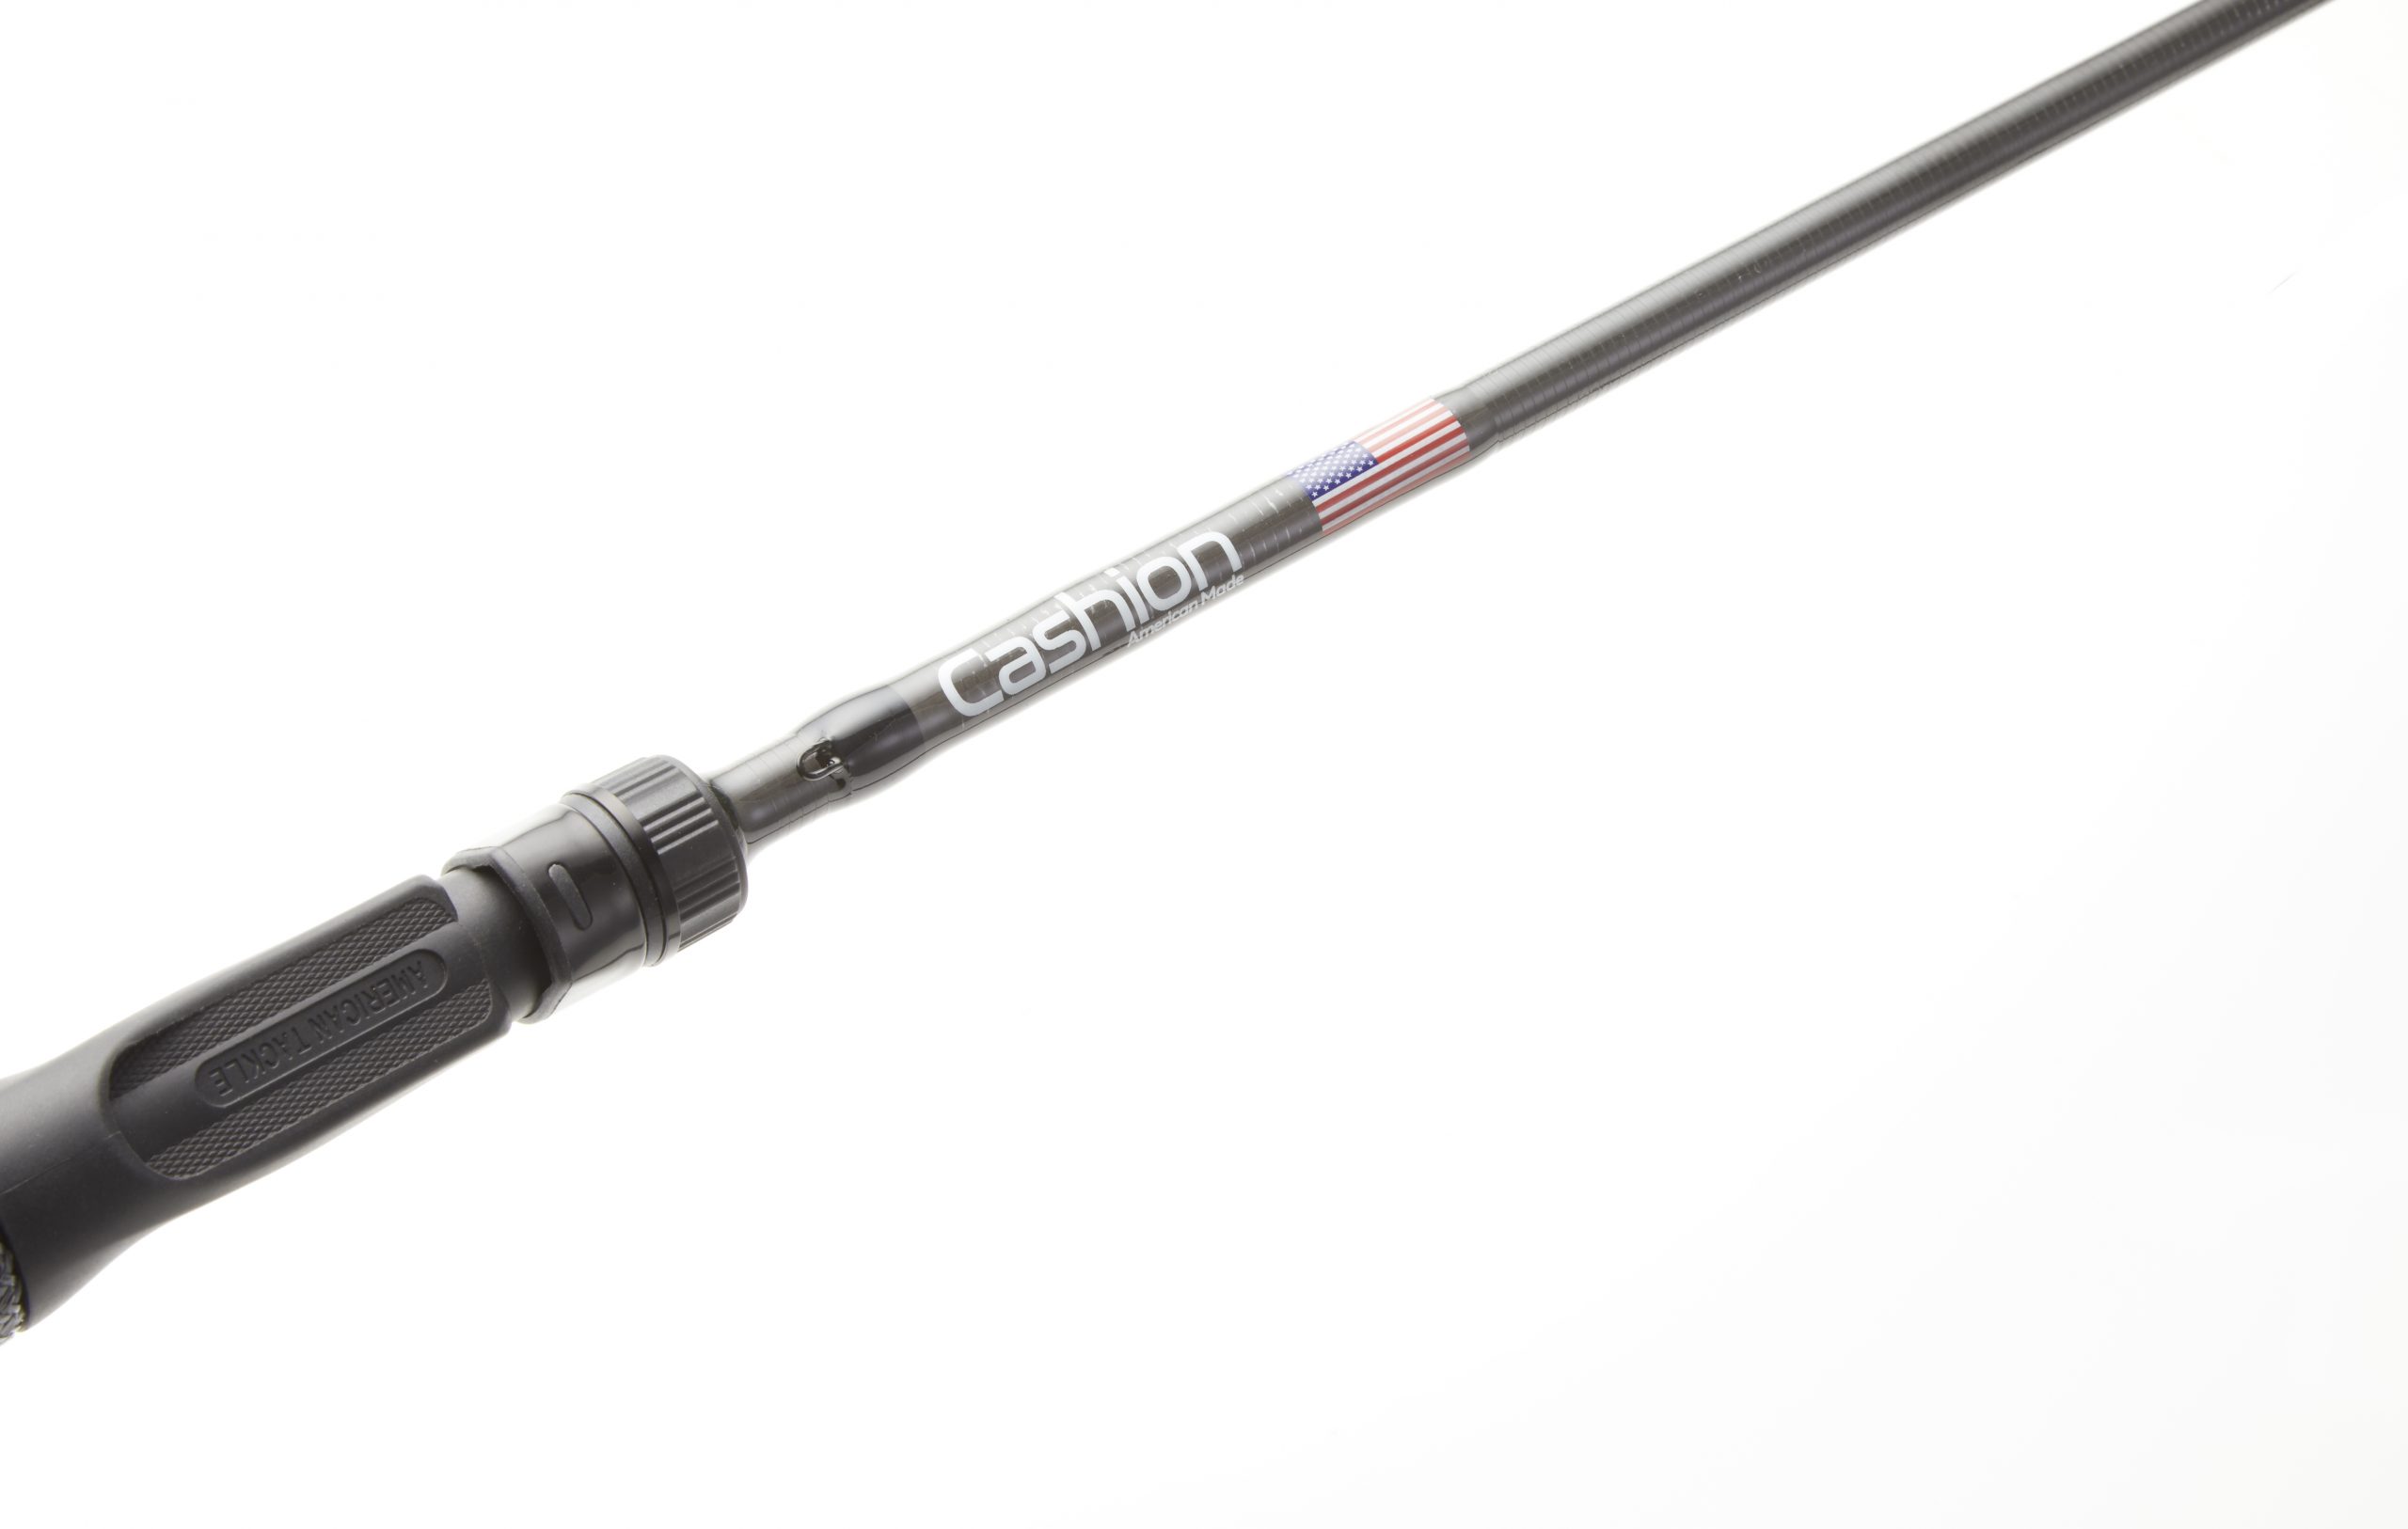 Cashion Rods Announces Pre-order of New ICON BFS Rods - Wired2Fish